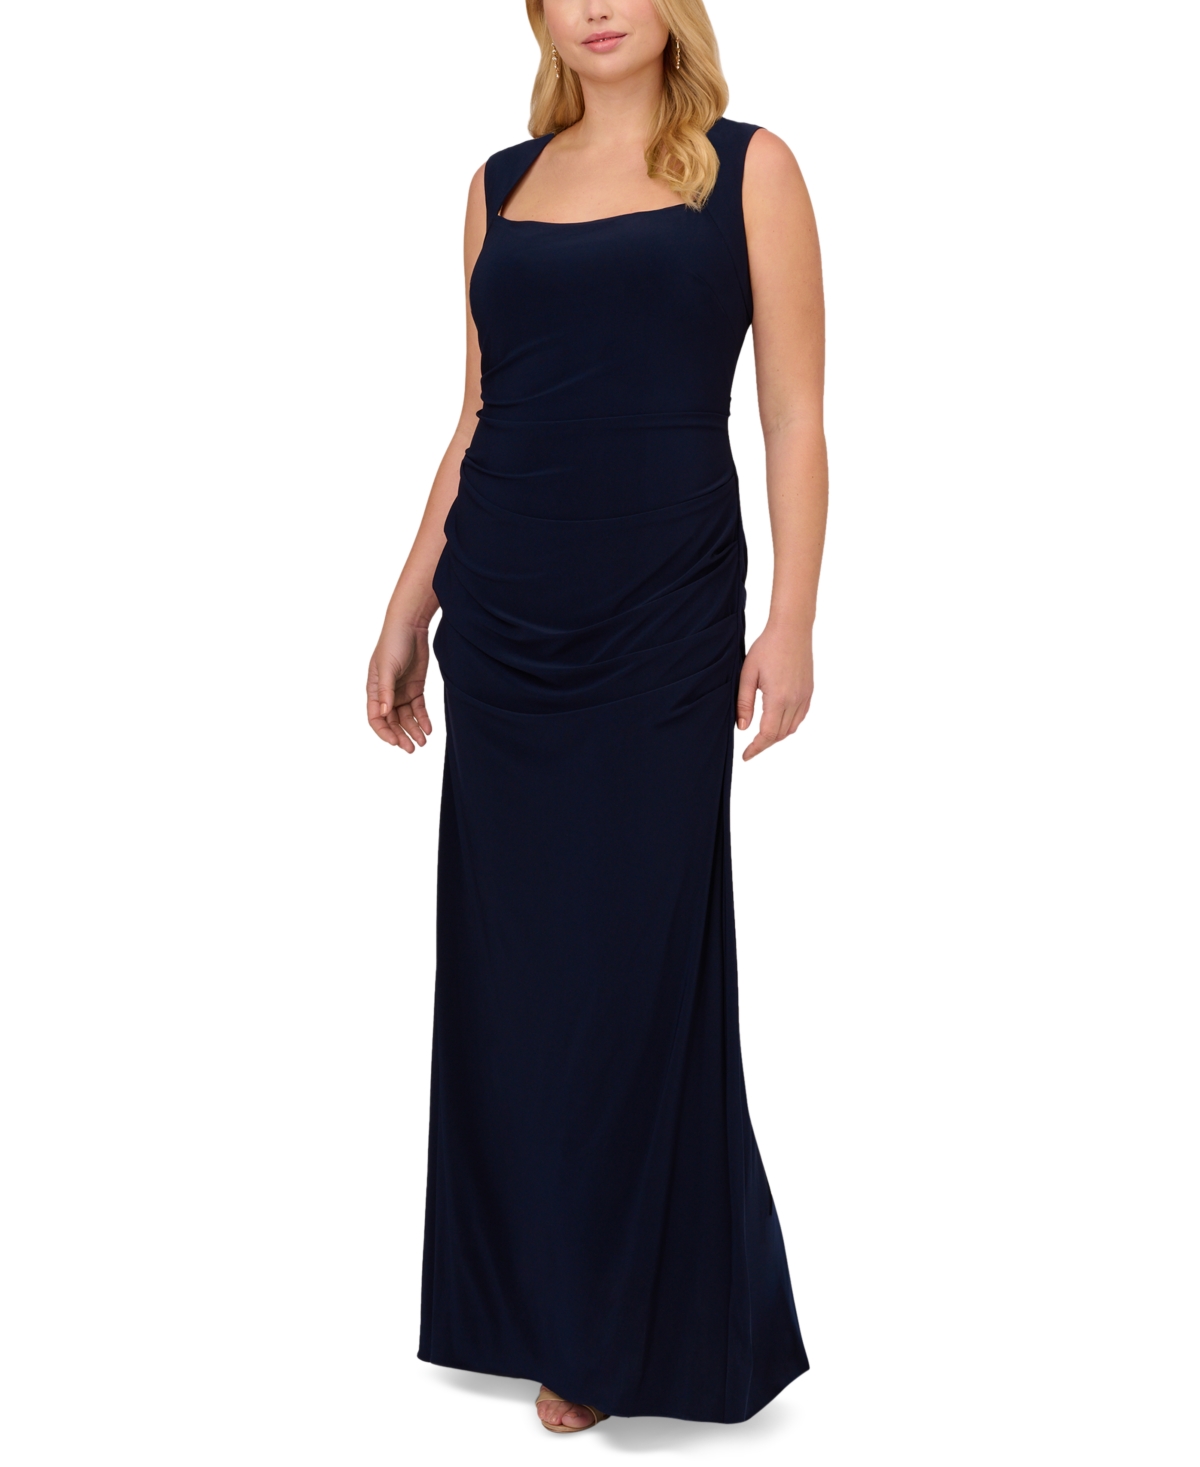 ADRIANNA PAPELL PLUS SIZE SLEEVELESS RUCHED GOWN